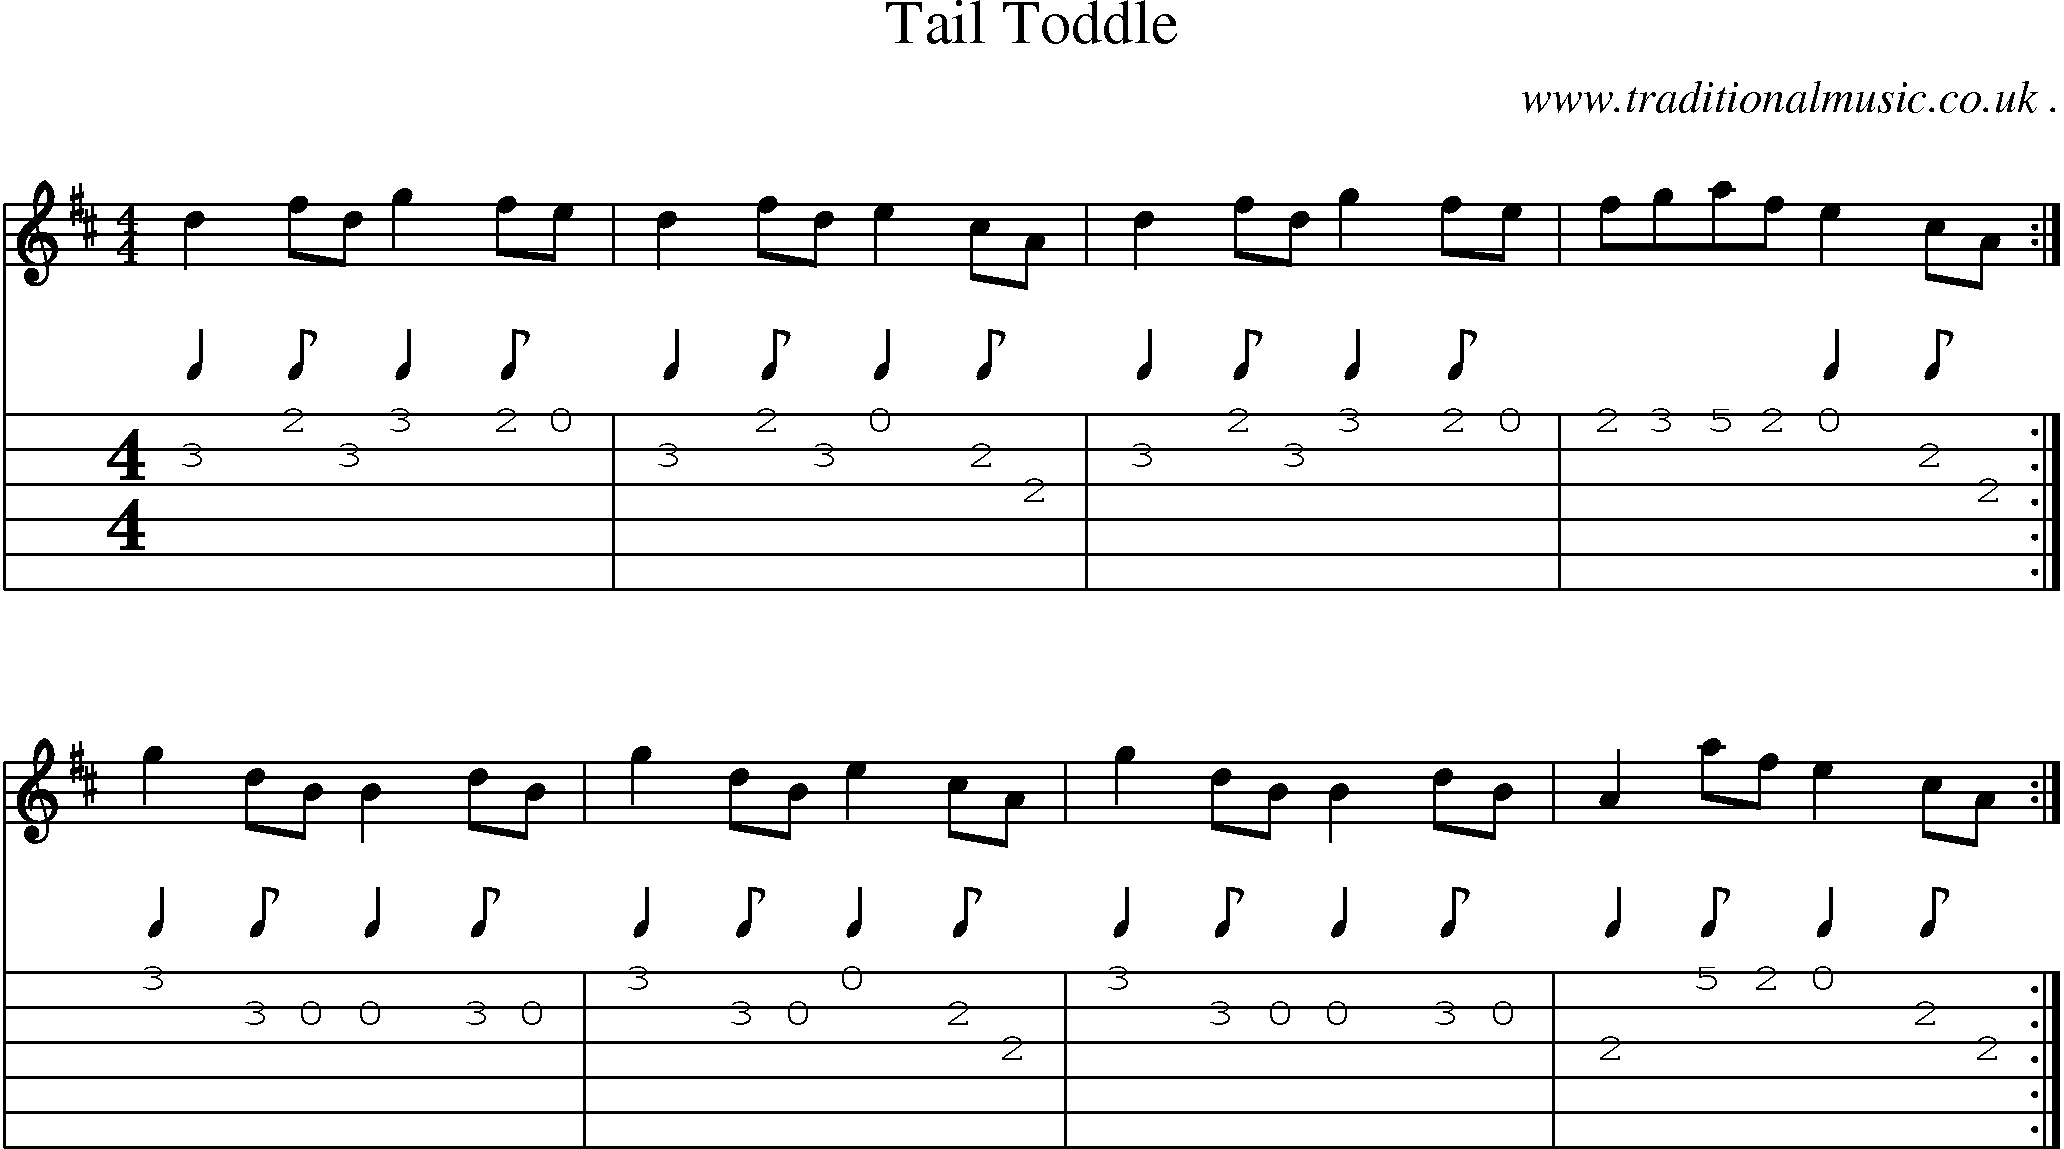 Sheet-music  score, Chords and Guitar Tabs for Tail Toddle